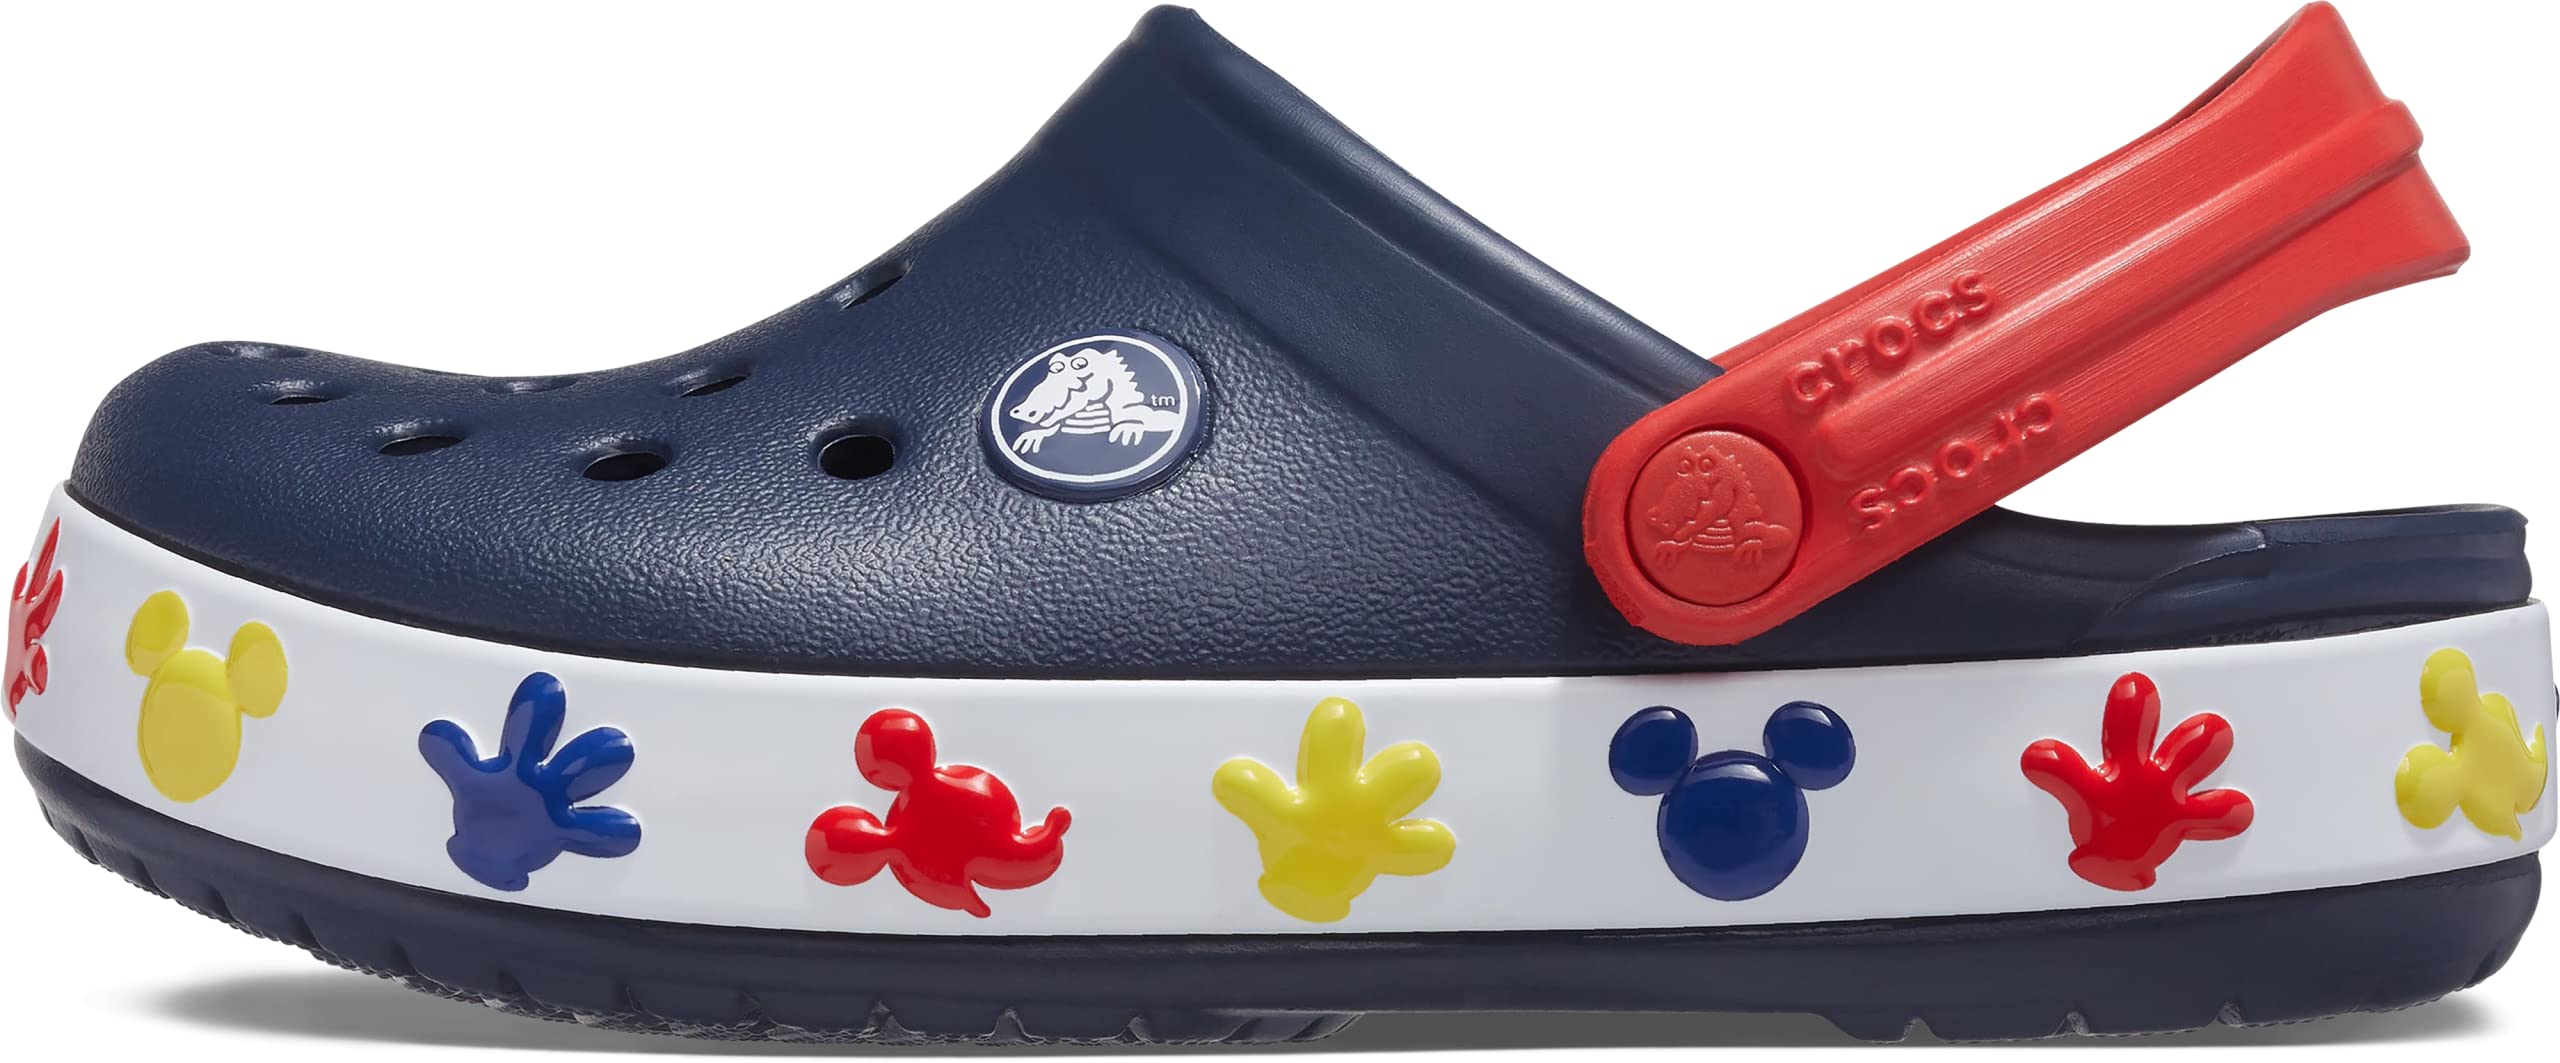 Crocs boys unisex-child Disney Mickey and Minnie Mouse Clogs, Light Up Shoes